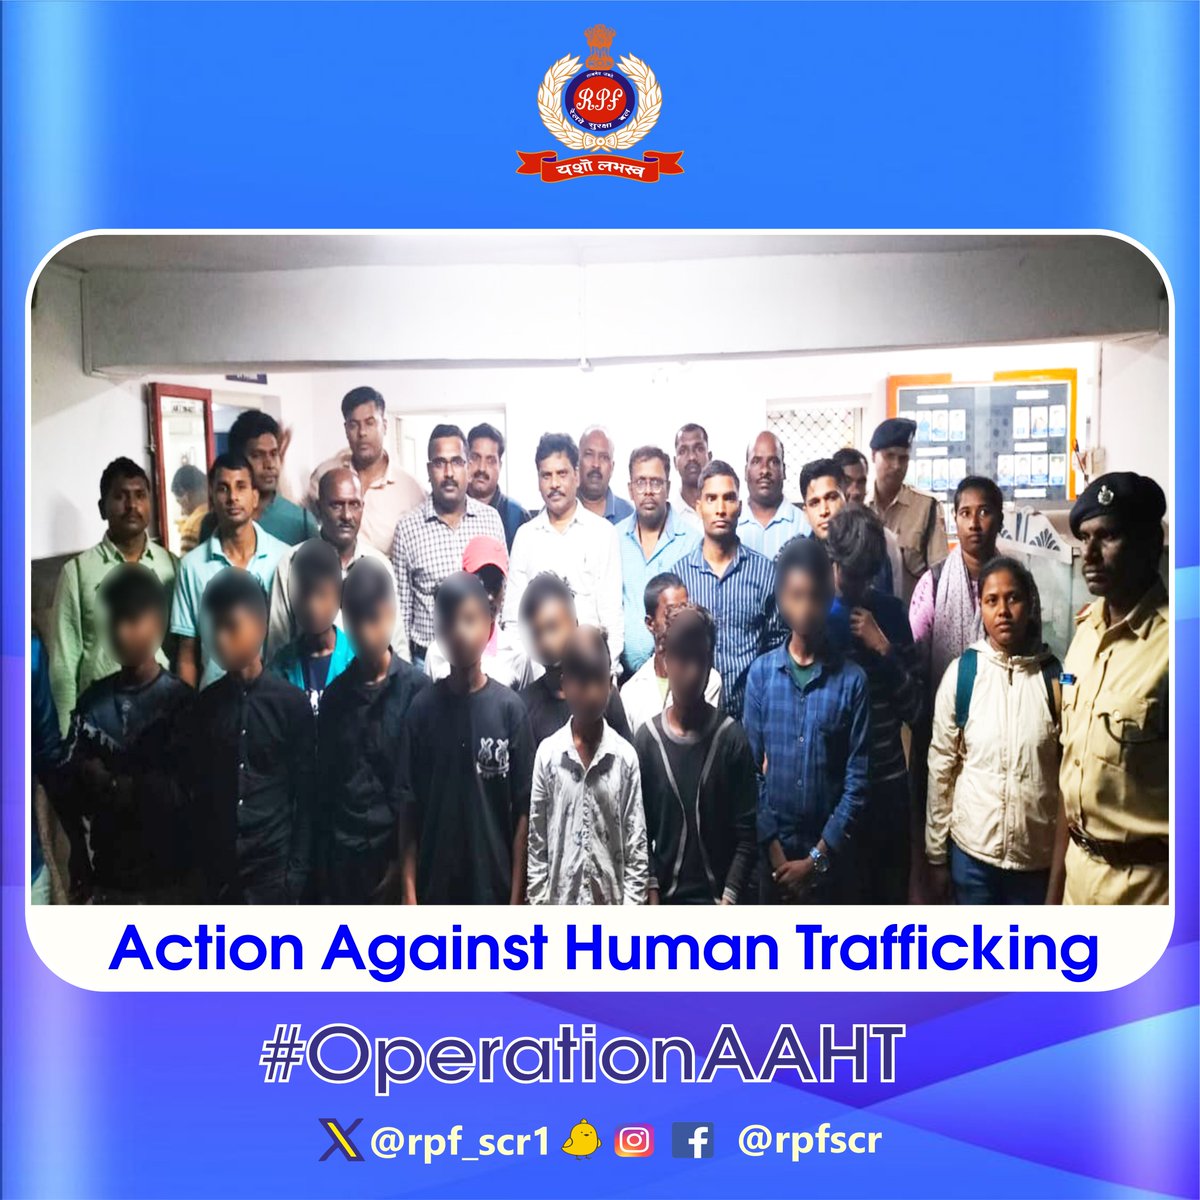 #RPF #Khammam along with @BBAIndia & other stake holders successfully rescued 5 boys & 4 tekhedhars who were being taken to #Hyderabad for labor work. Handed over to #ChildHelpline for care and protection. #OperationAAHT
@RPF_INDIA @SCRailwayIndia @RailMinIndia @rpfscr_sc